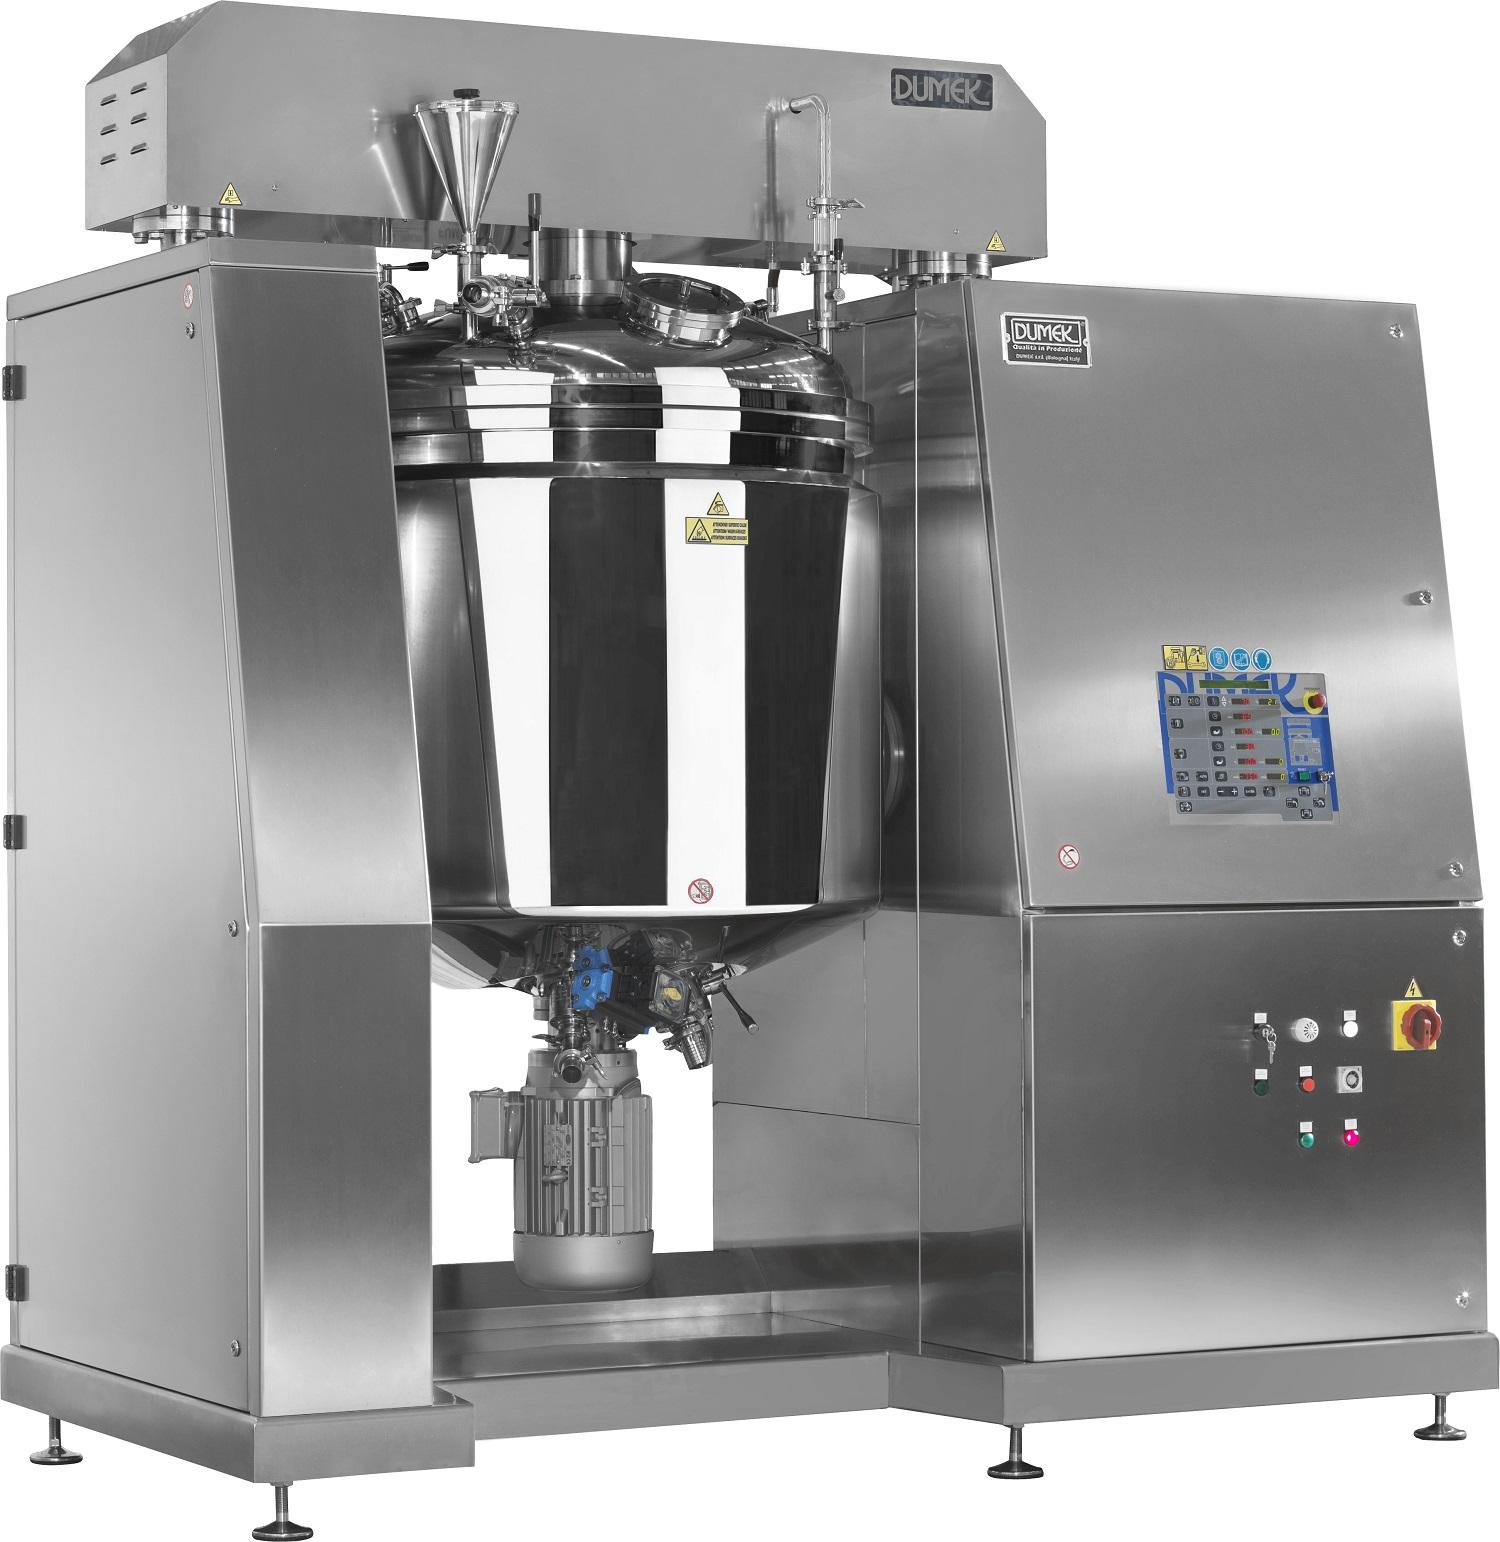 VACUUM TURBO-EMULSIFIERS 150 AND 1000 BY DUMEK: THE BEST TECHNOLOGY TO PROCESS LIQUID AND CREAMY PRODUCTS